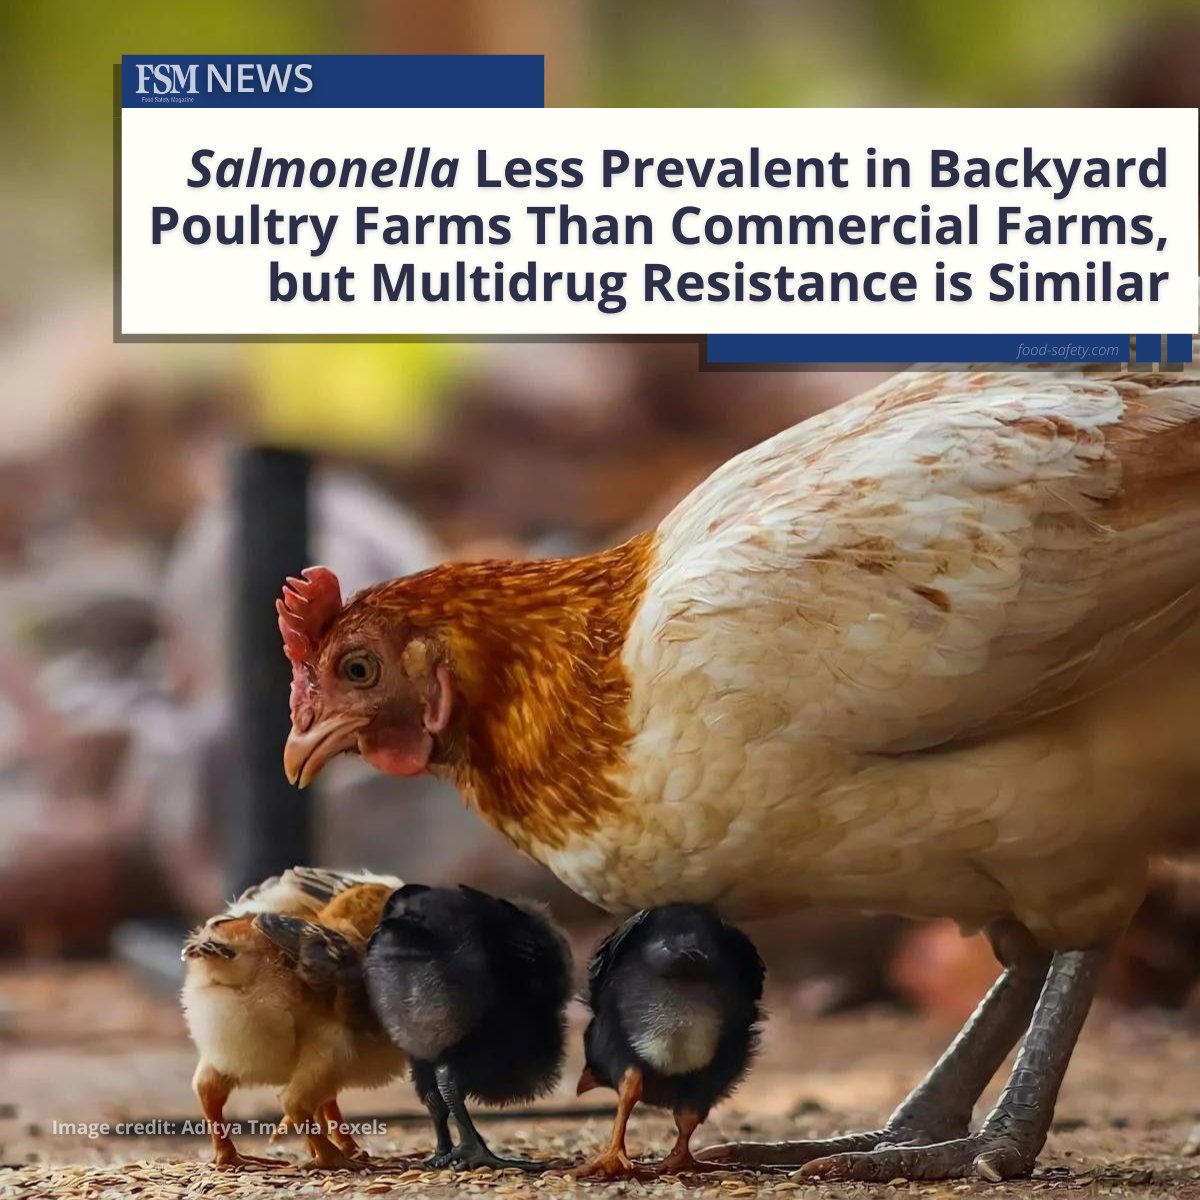 Researchers compared broiler farms of various sizes and found higher rates of #Salmonella at large commercial operations than at small backyard farms; however, multidrug-resistant isolates were found at both types of farm.

👉 MORE: brnw.ch/21wJvdZ

#foodsafety #AMR